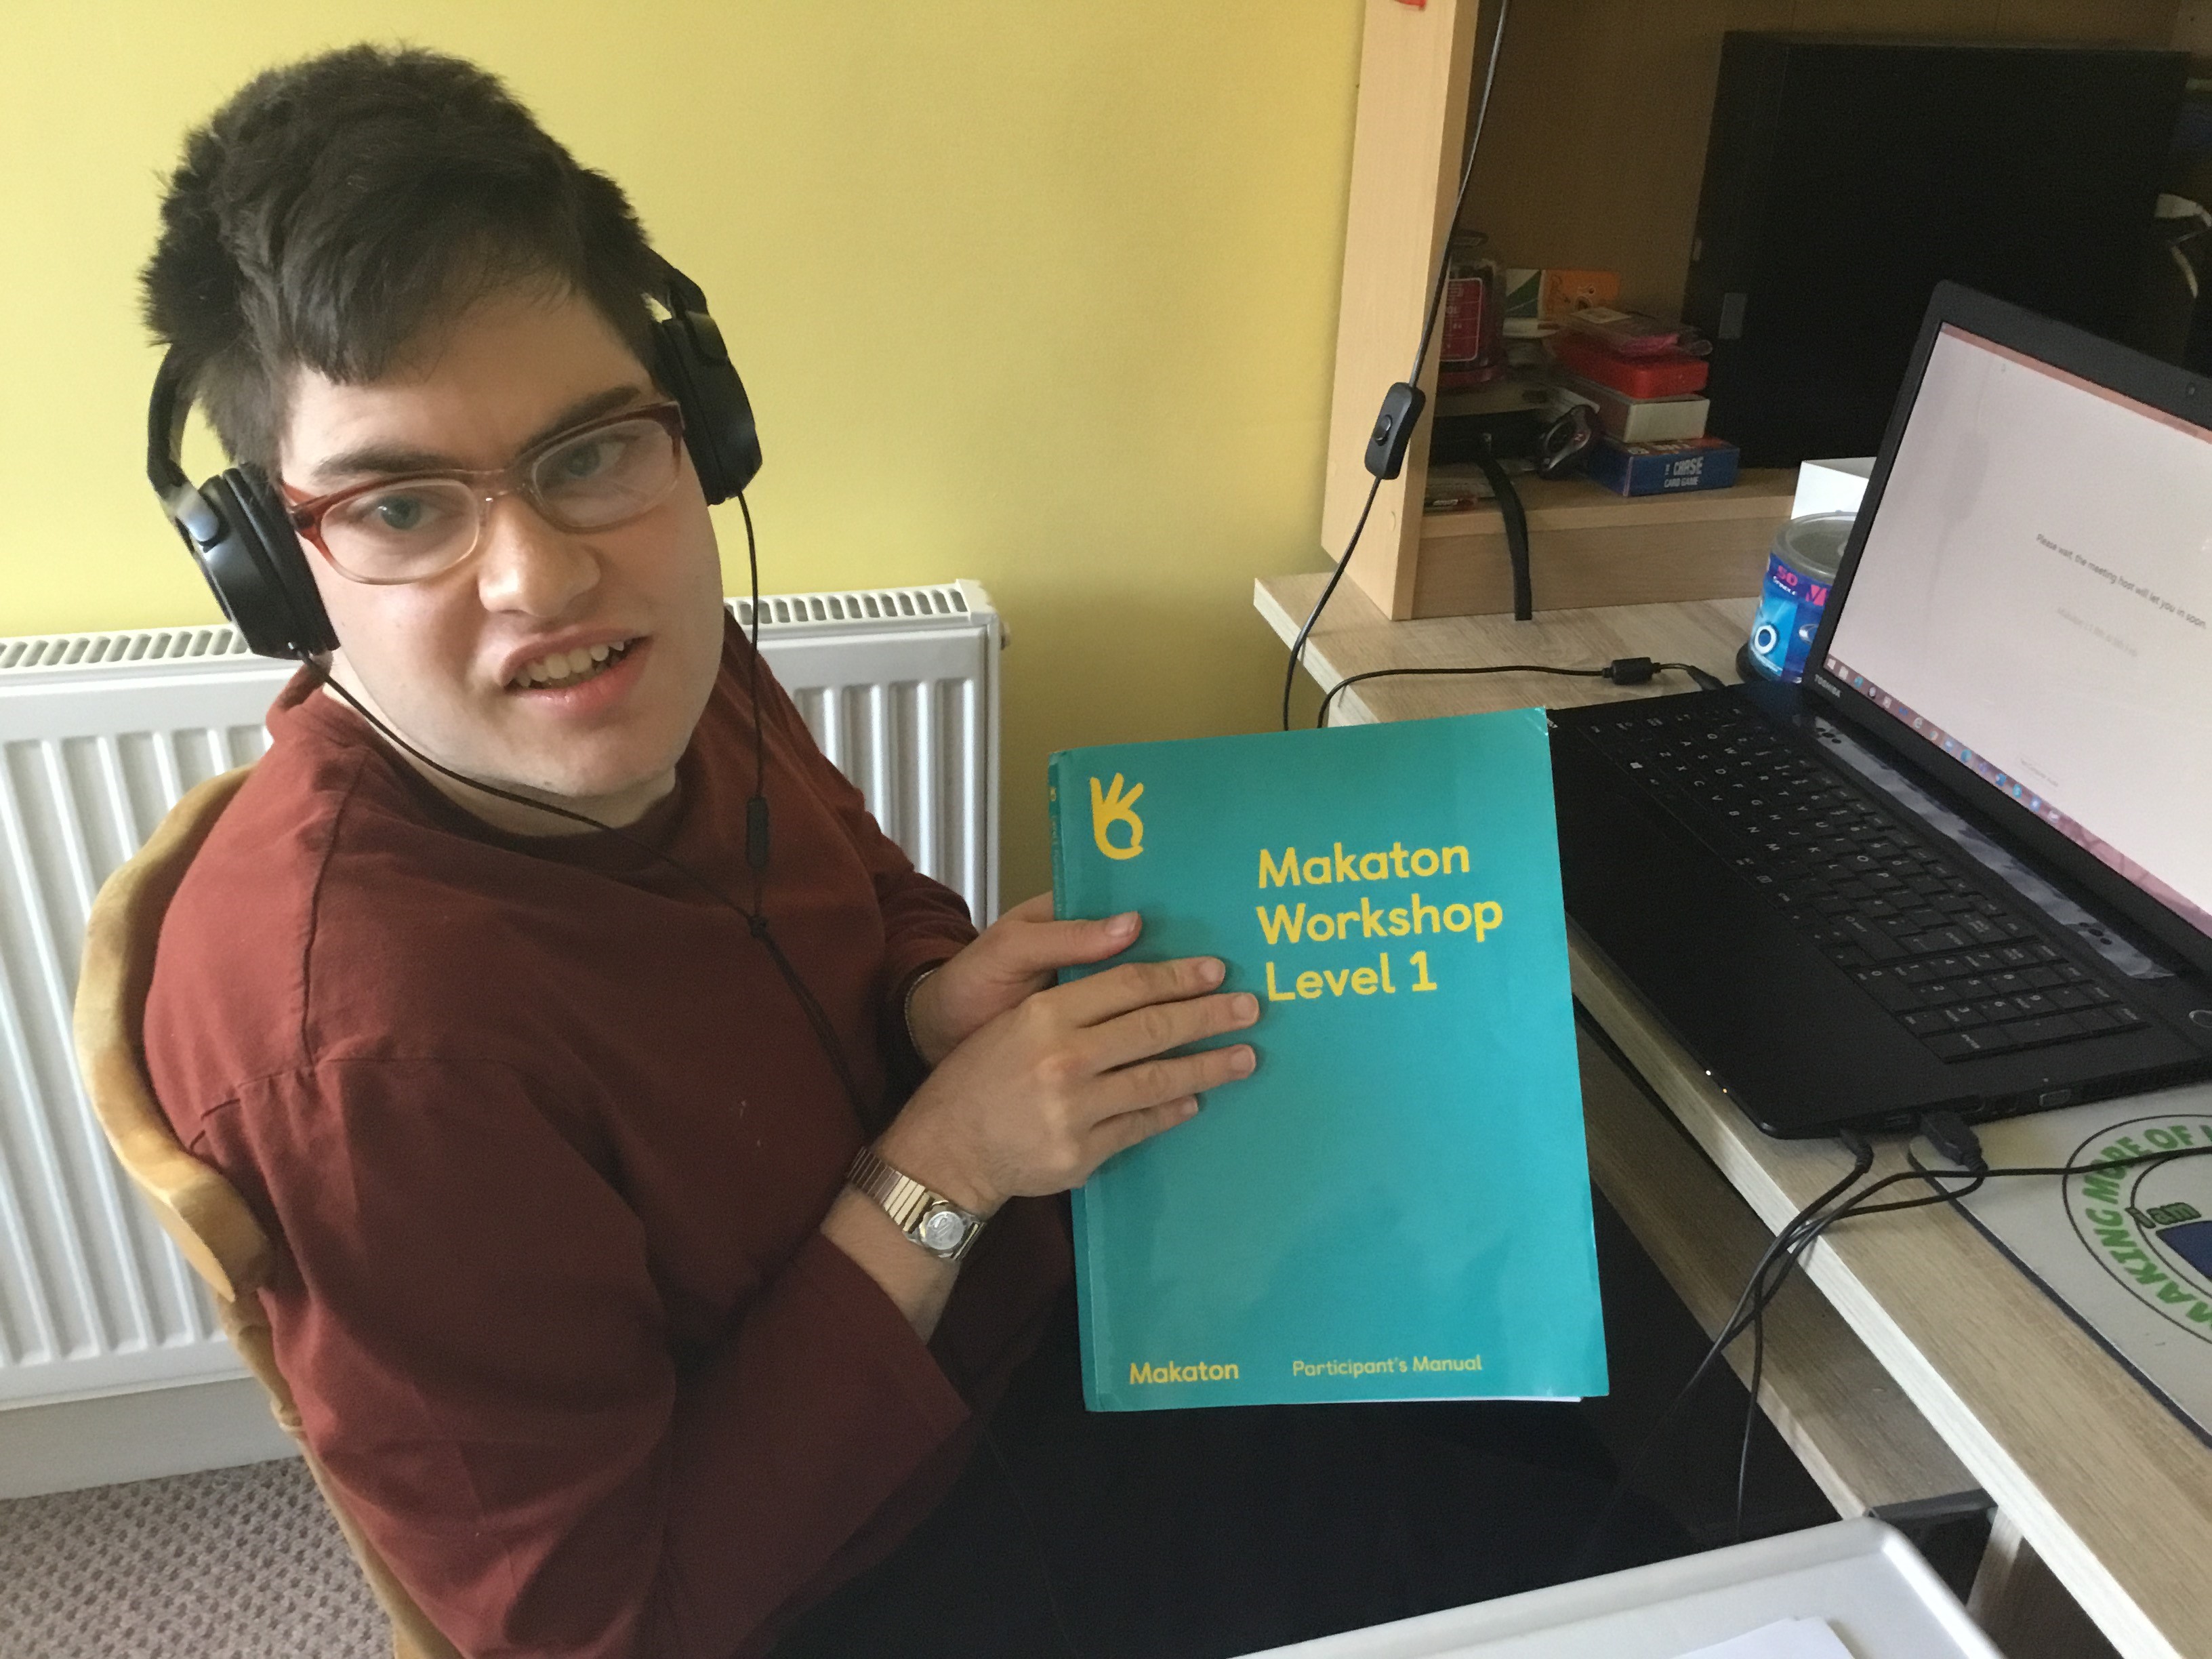 T Signing Helper with Makaton Level 1 Workshop manual